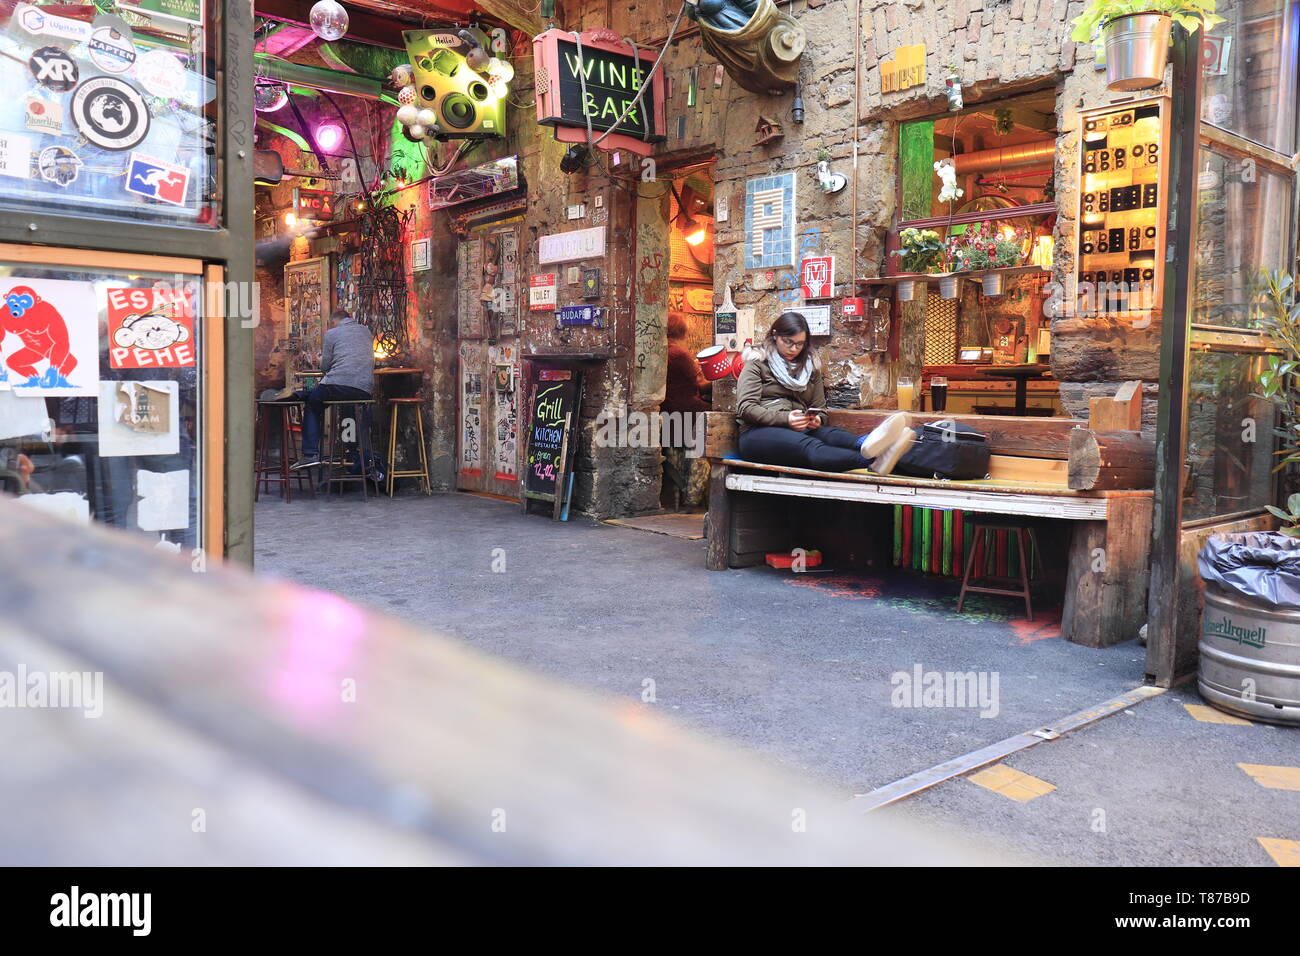 BUDAPEST, HUNGARY - april 2019: Interior view of the famous Szimpla Garden ruin pub with woman sitting on bench playing with mobile phone. Stock Photo